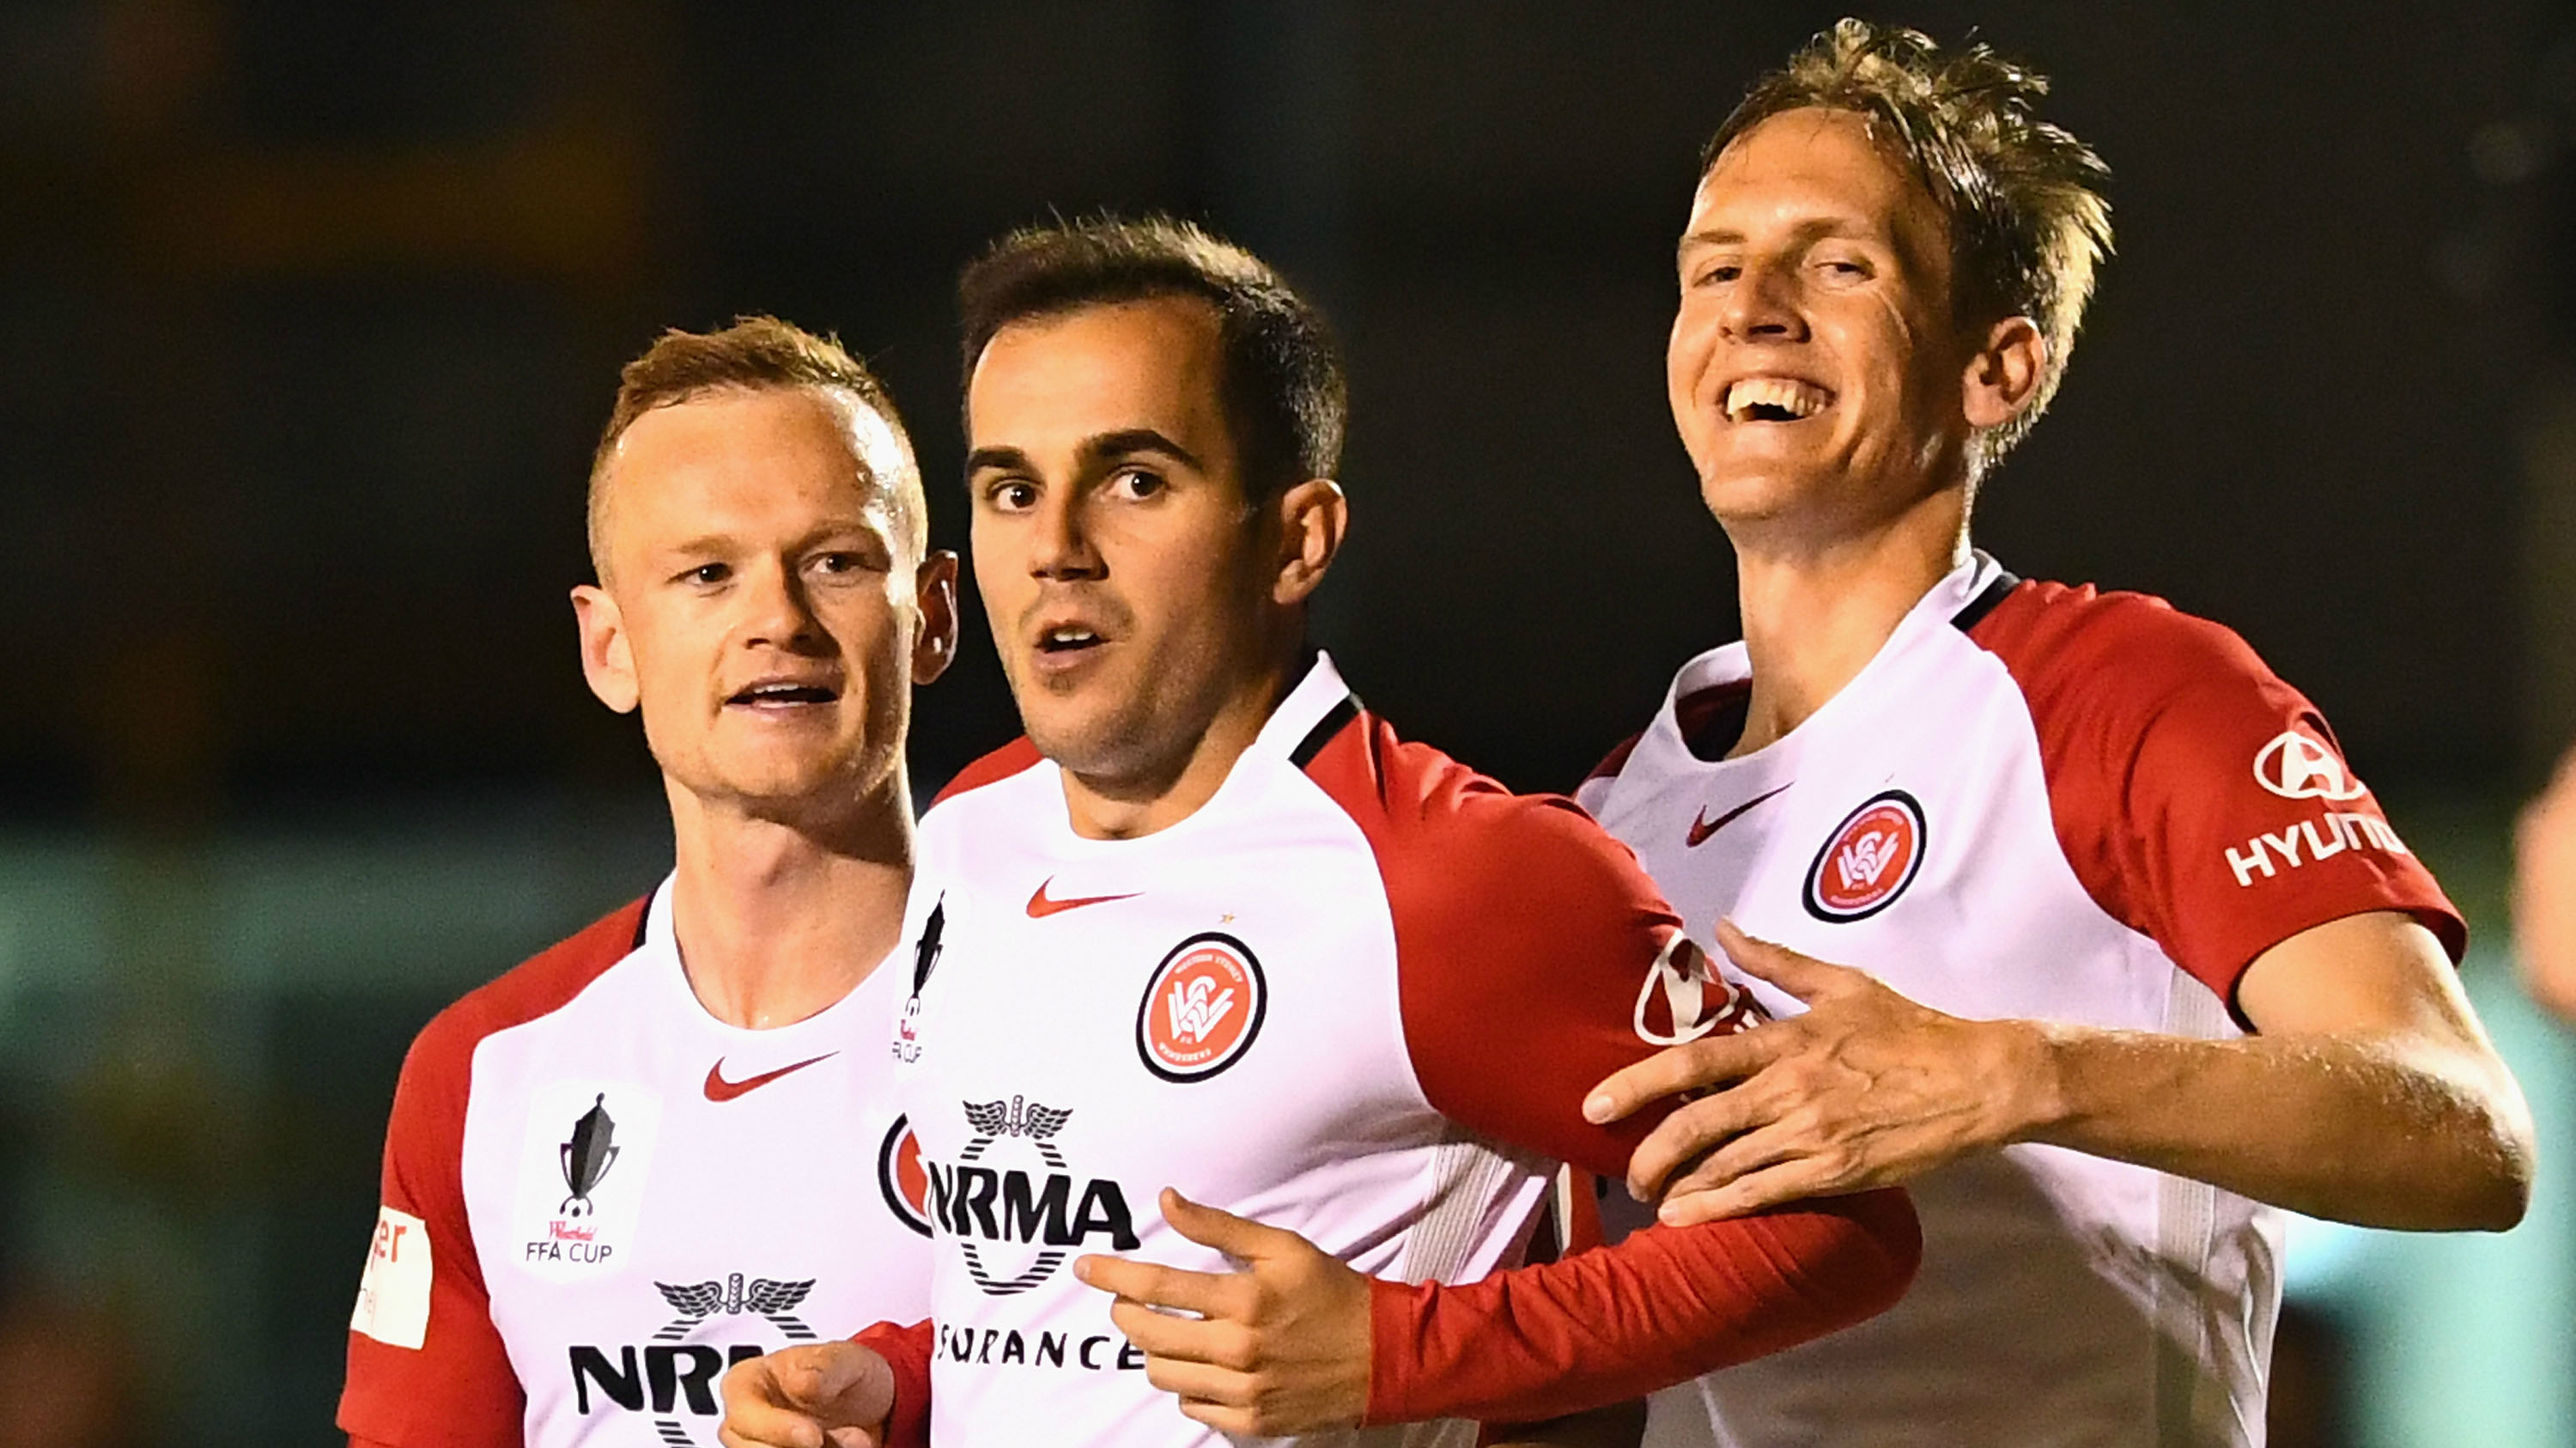 wanderers-players-celebrate-one-of-their-four-goals-in-the-big-win-over-bentleigh-greens_x0ziptmey7em1it4xszyzz7v9.jpg